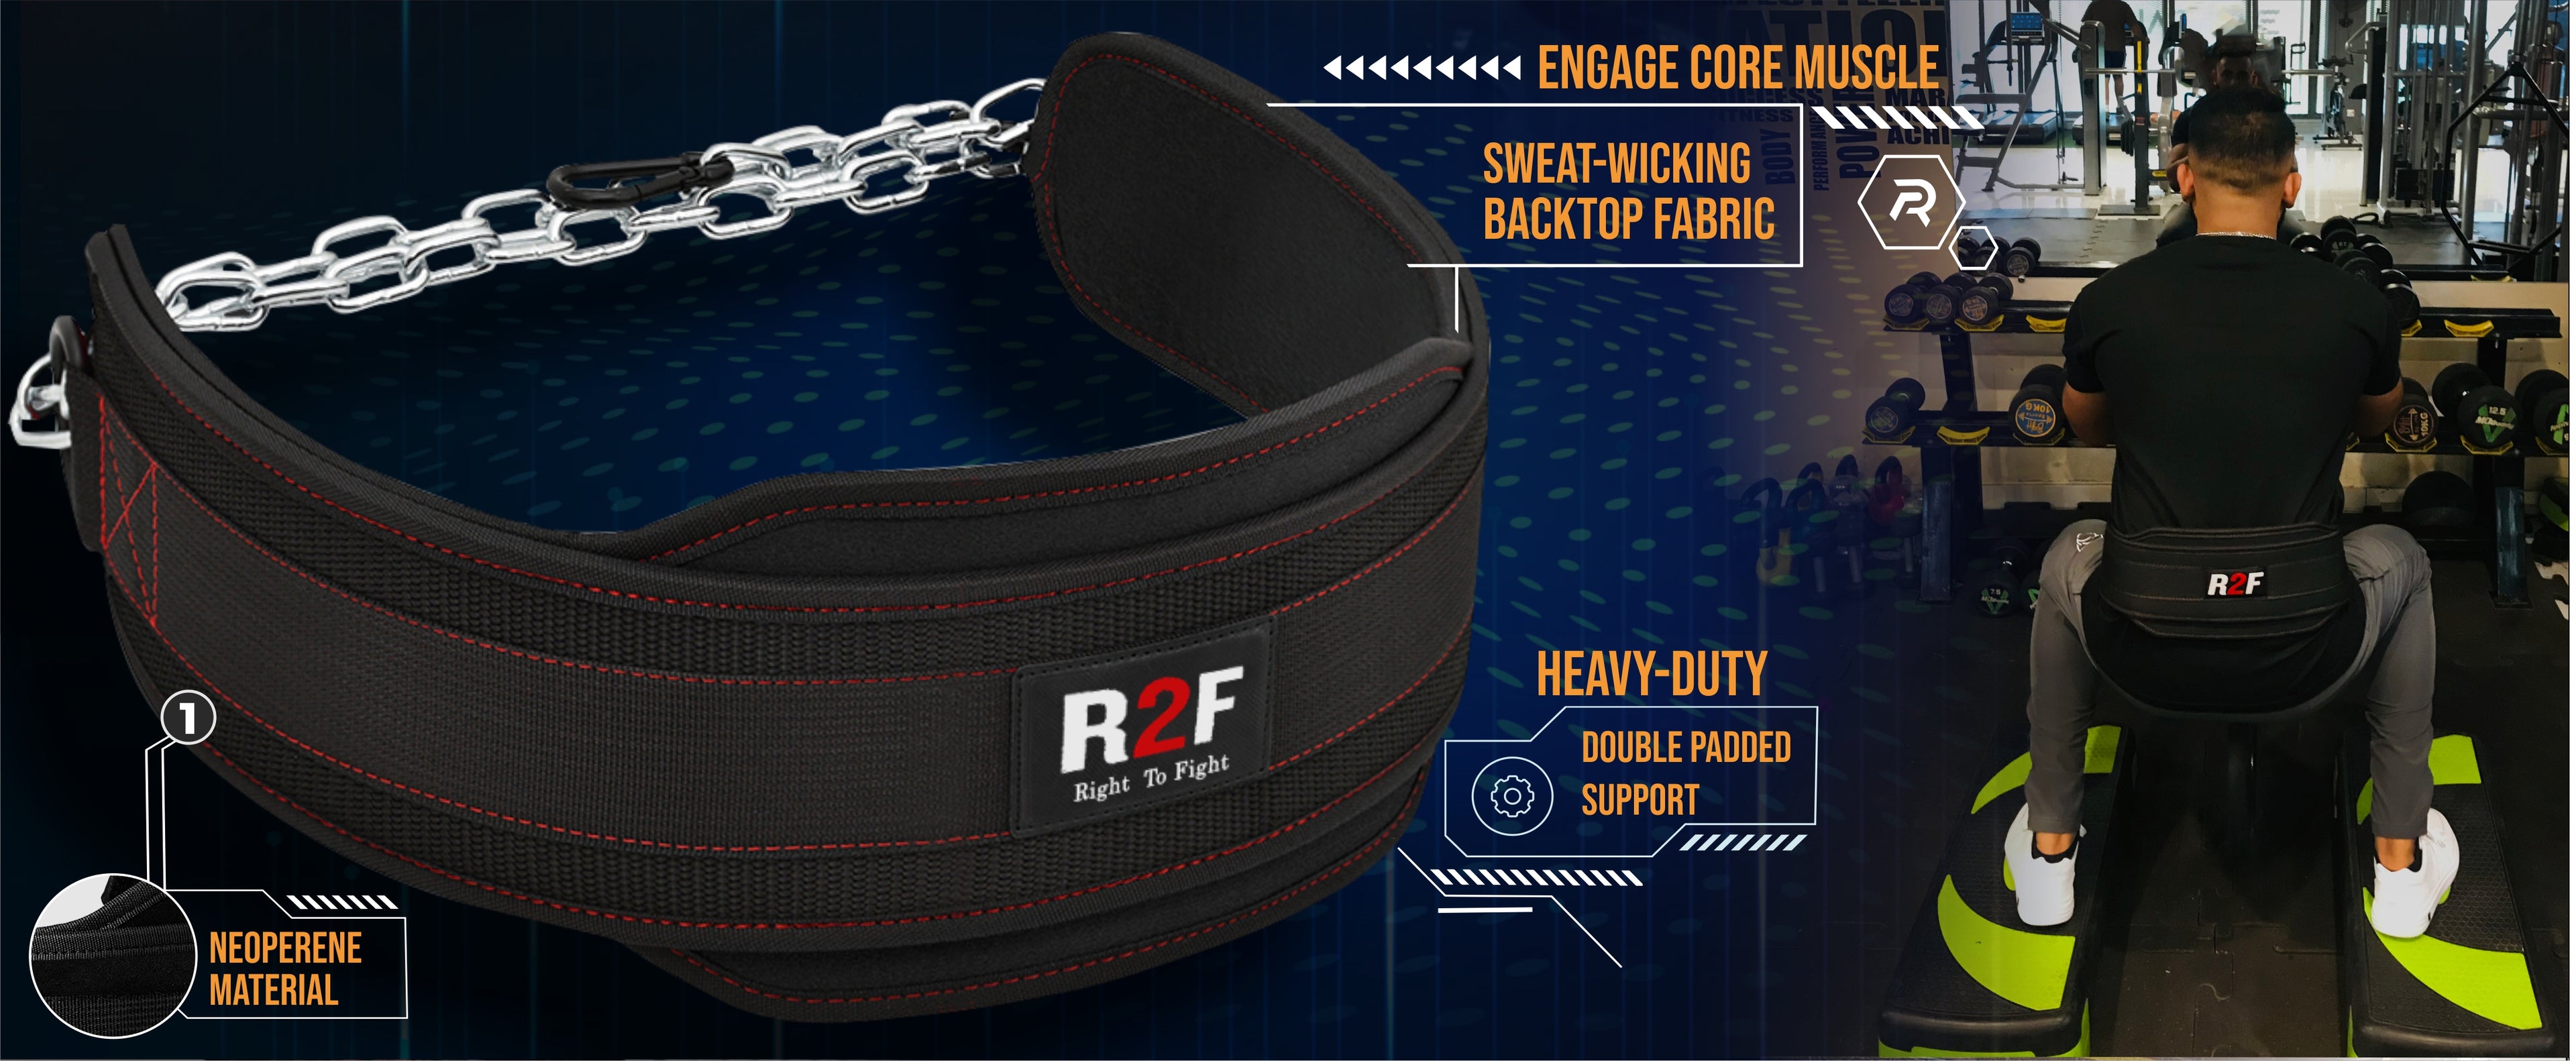 R2F Gel Boxing Hand Wraps Inner Gloves, Wrist Straps, Wrist Support, Elasticated, Padded Fist Hand Protection, Muay Thai, MMA, Martial Arts, Punching Speed Bag, Training, Handwraps, R2F Ankle Straps, Cable Machine Attachments, Fitness, Straps, Gym Cuffs, Kickbacks, Glute Workouts, Leg Extensions, Curls, Booty Hip Abductors, Exercise for Men and Women